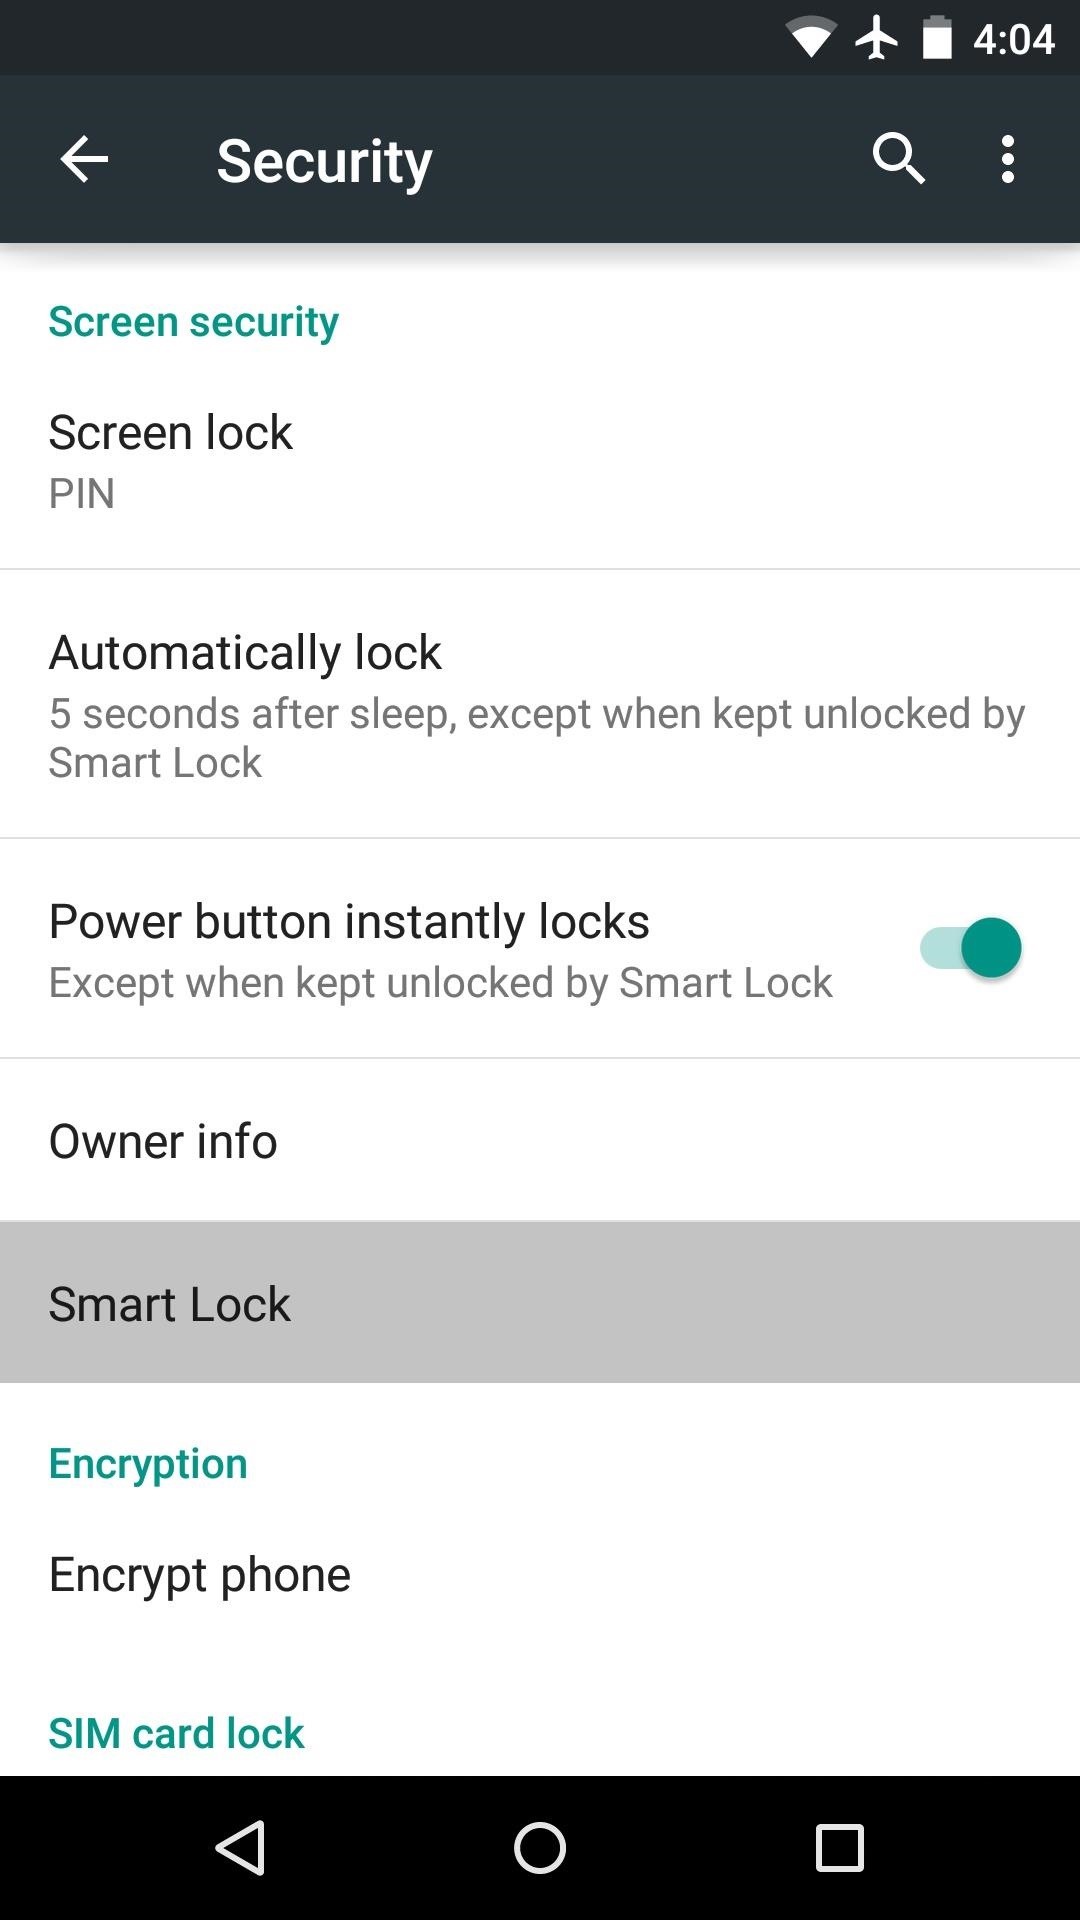 Android Security: 13 Must-Know Tips for Keeping Your Phone Secure